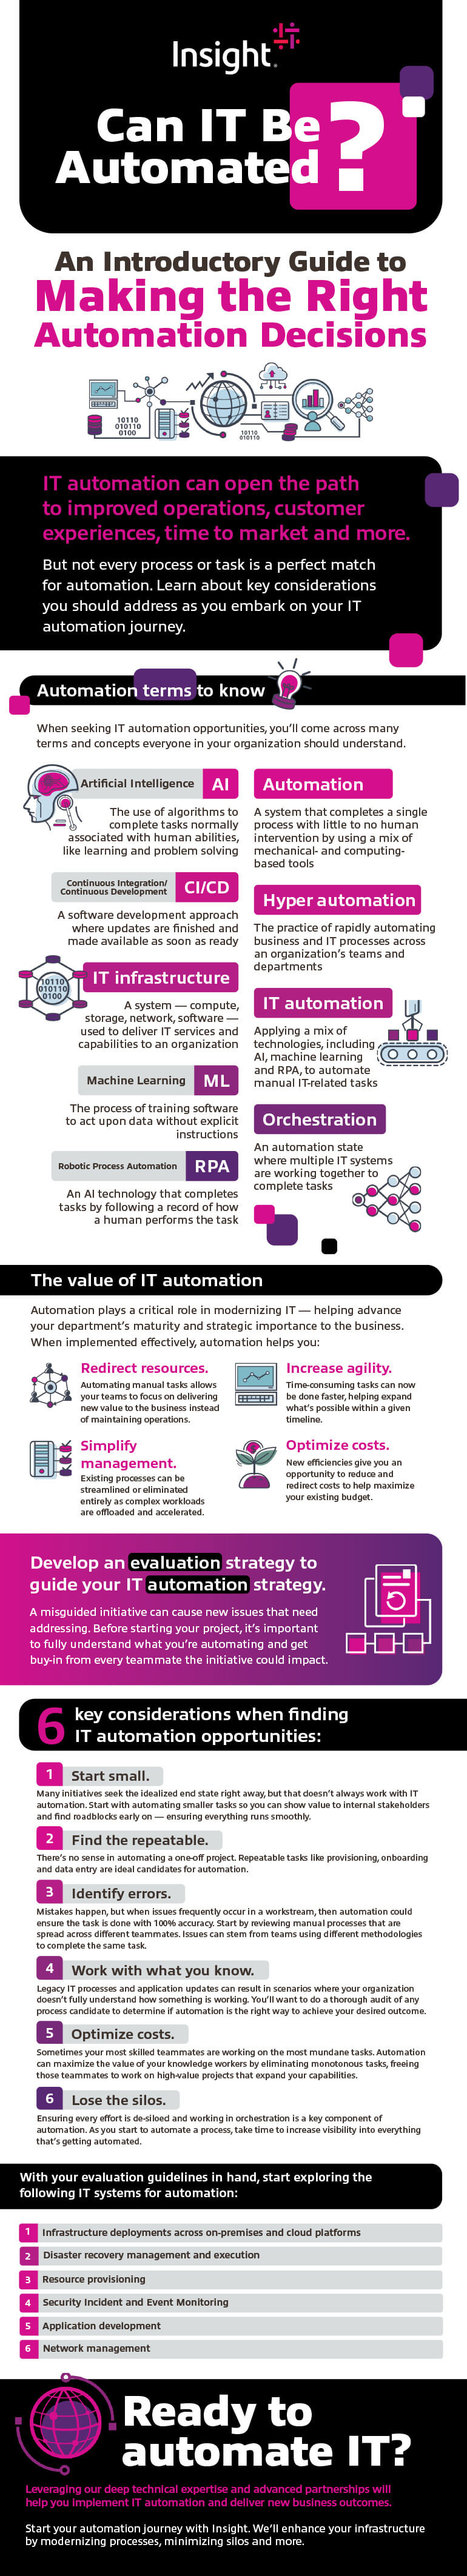 An Introductory Guide to Making the Right Automation Decisions infographic. as translated below. What can be automated